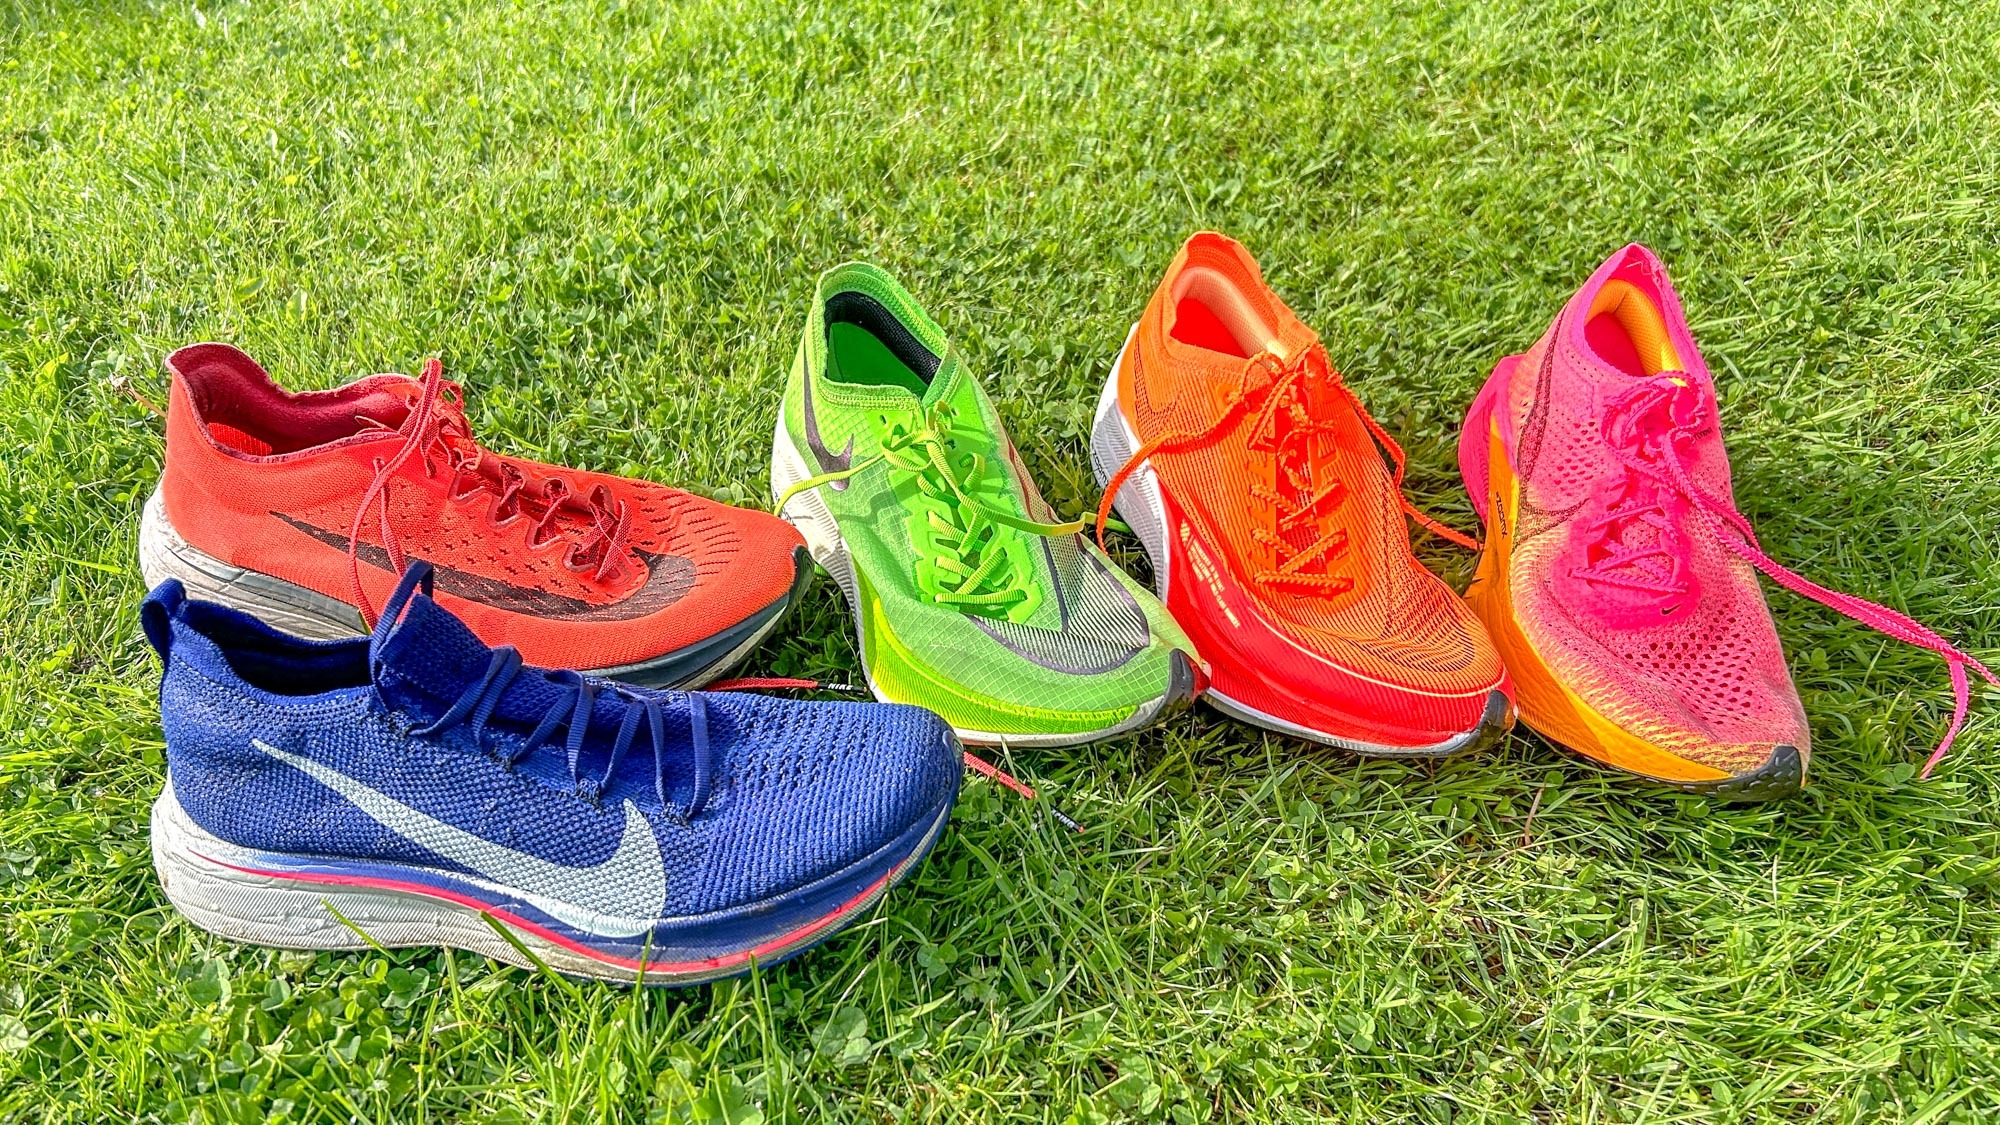 The Nike Vaporfly 4% and several other carbon plate running shoes on some grass